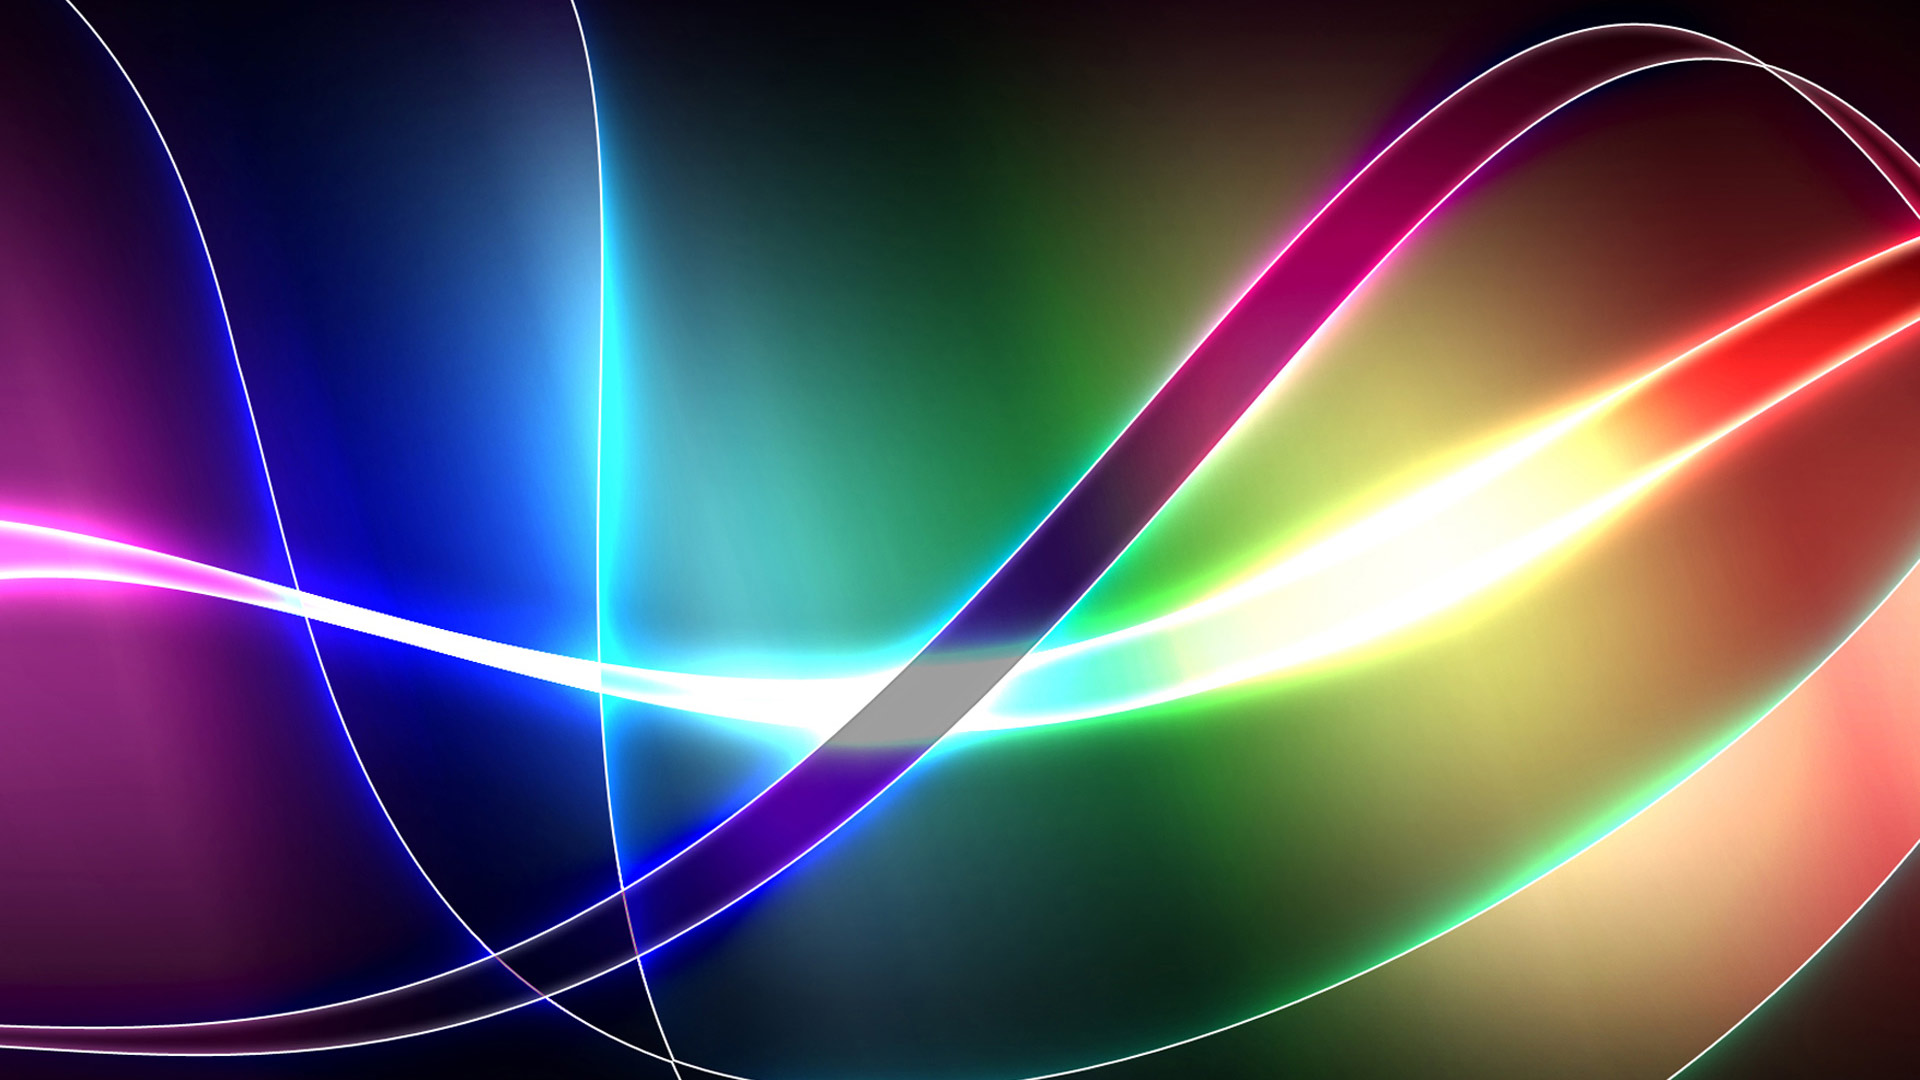 Colorful Abstract Backgrounds 3217 Hd Wallpapers in Abstract